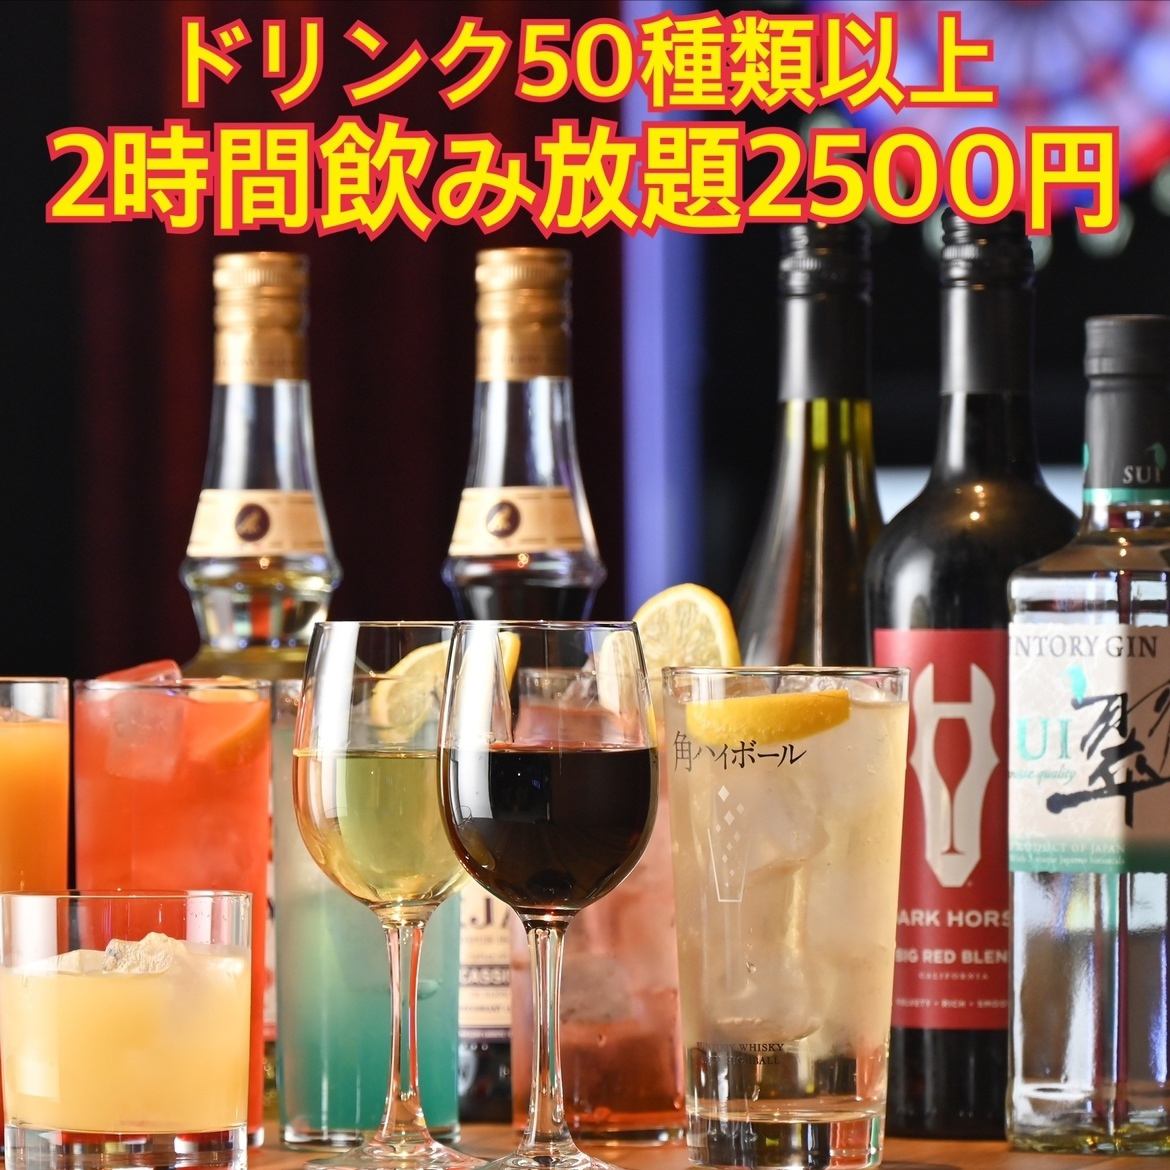 All-you-can-drink for 2 hours starts from 2,500 yen ★Use it for your second or third party!